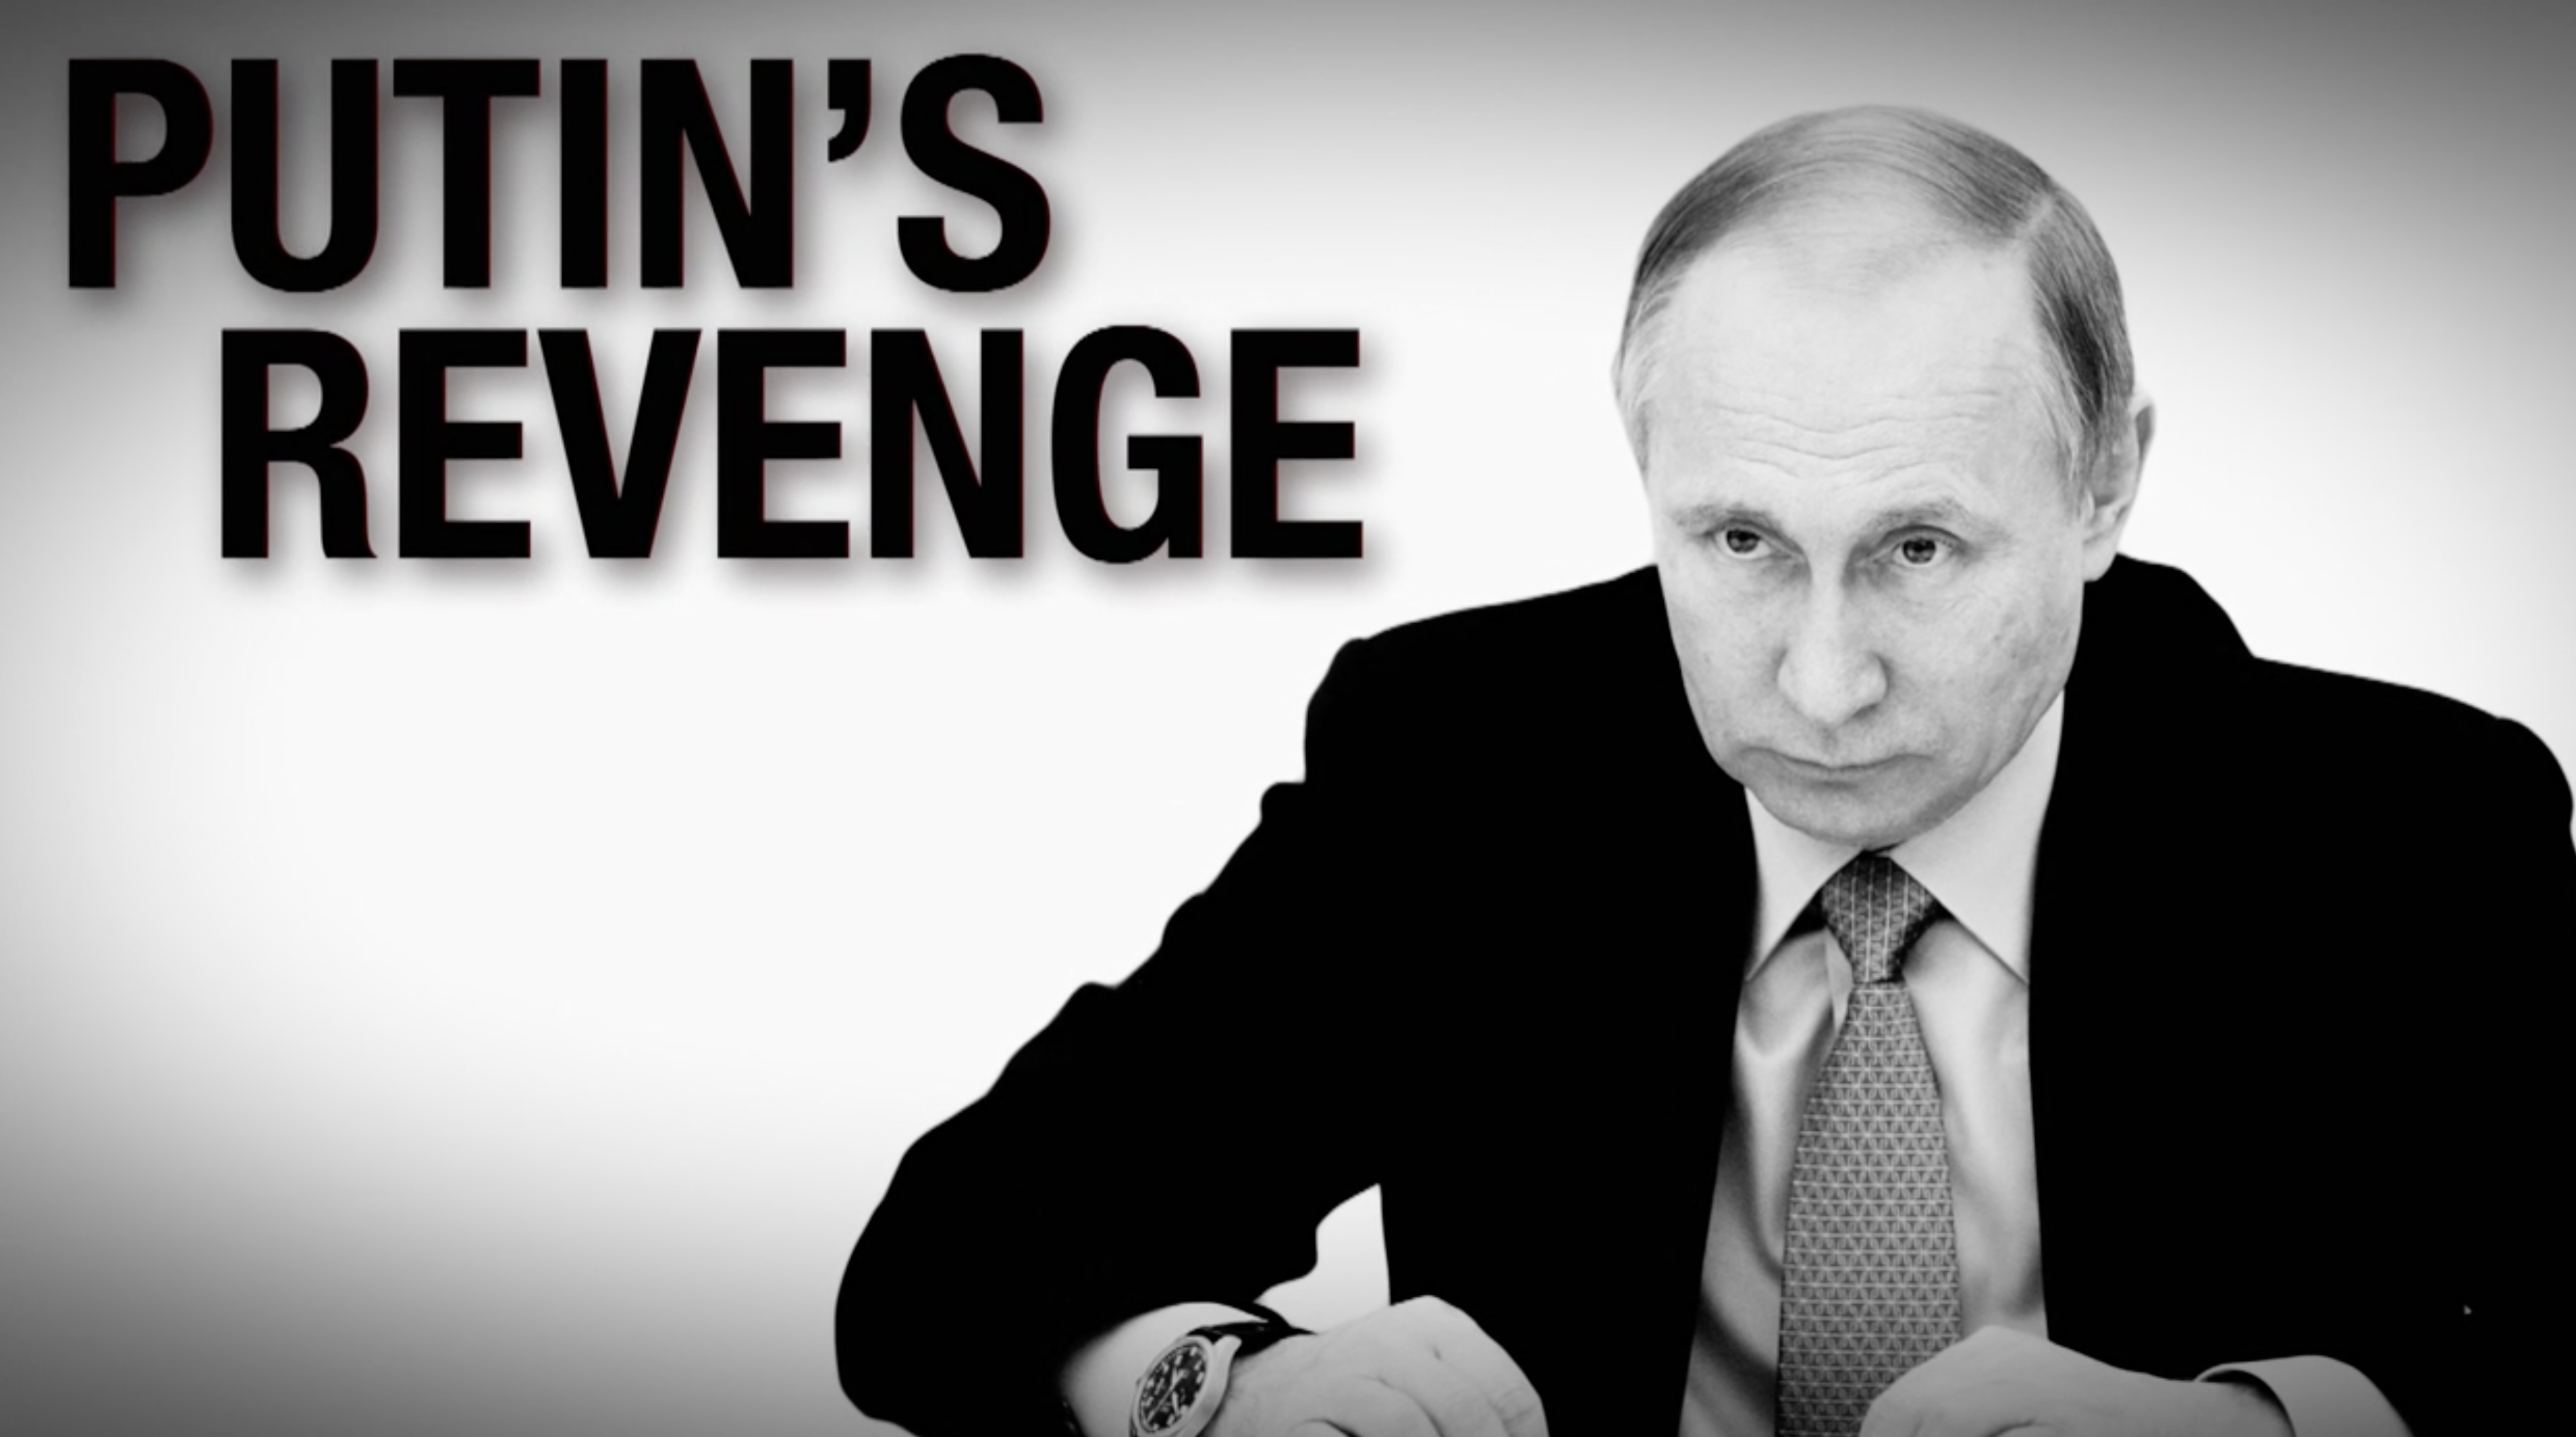 In an effort to increase transparency, Frontline posted dozens of interviews—with over 70 hours' worth of video—garnered from the raw footage for their fall 2017 documentary "Putin's Revenge" 